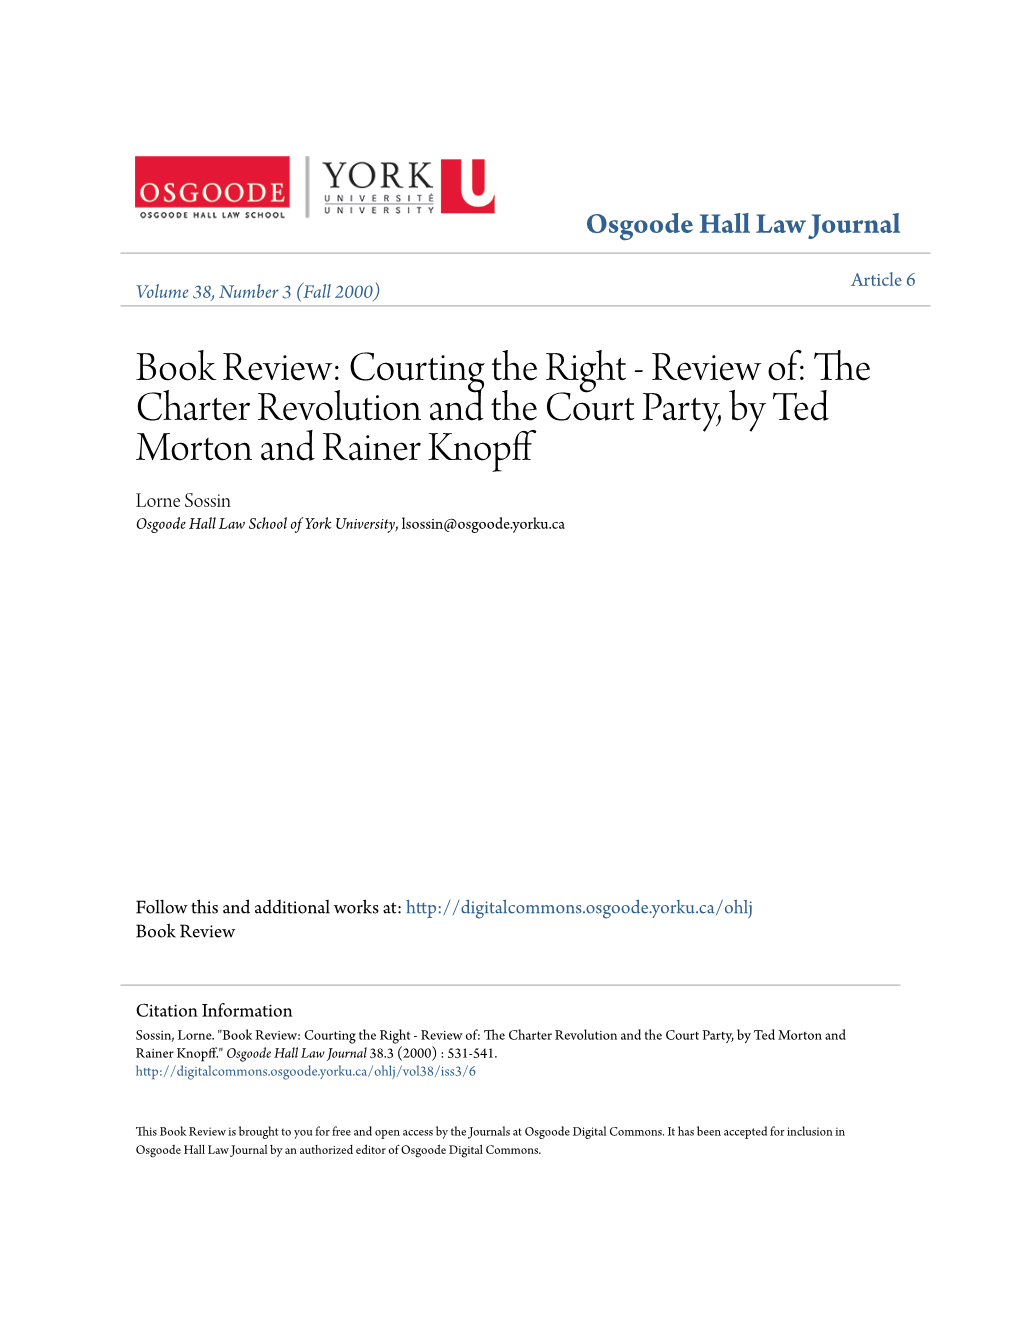 The Charter Revolution and the Court Party, by Ted Morton and Rainer Knopff Lorne Sossin Osgoode Hall Law School of York University, Lsossin@Osgoode.Yorku.Ca